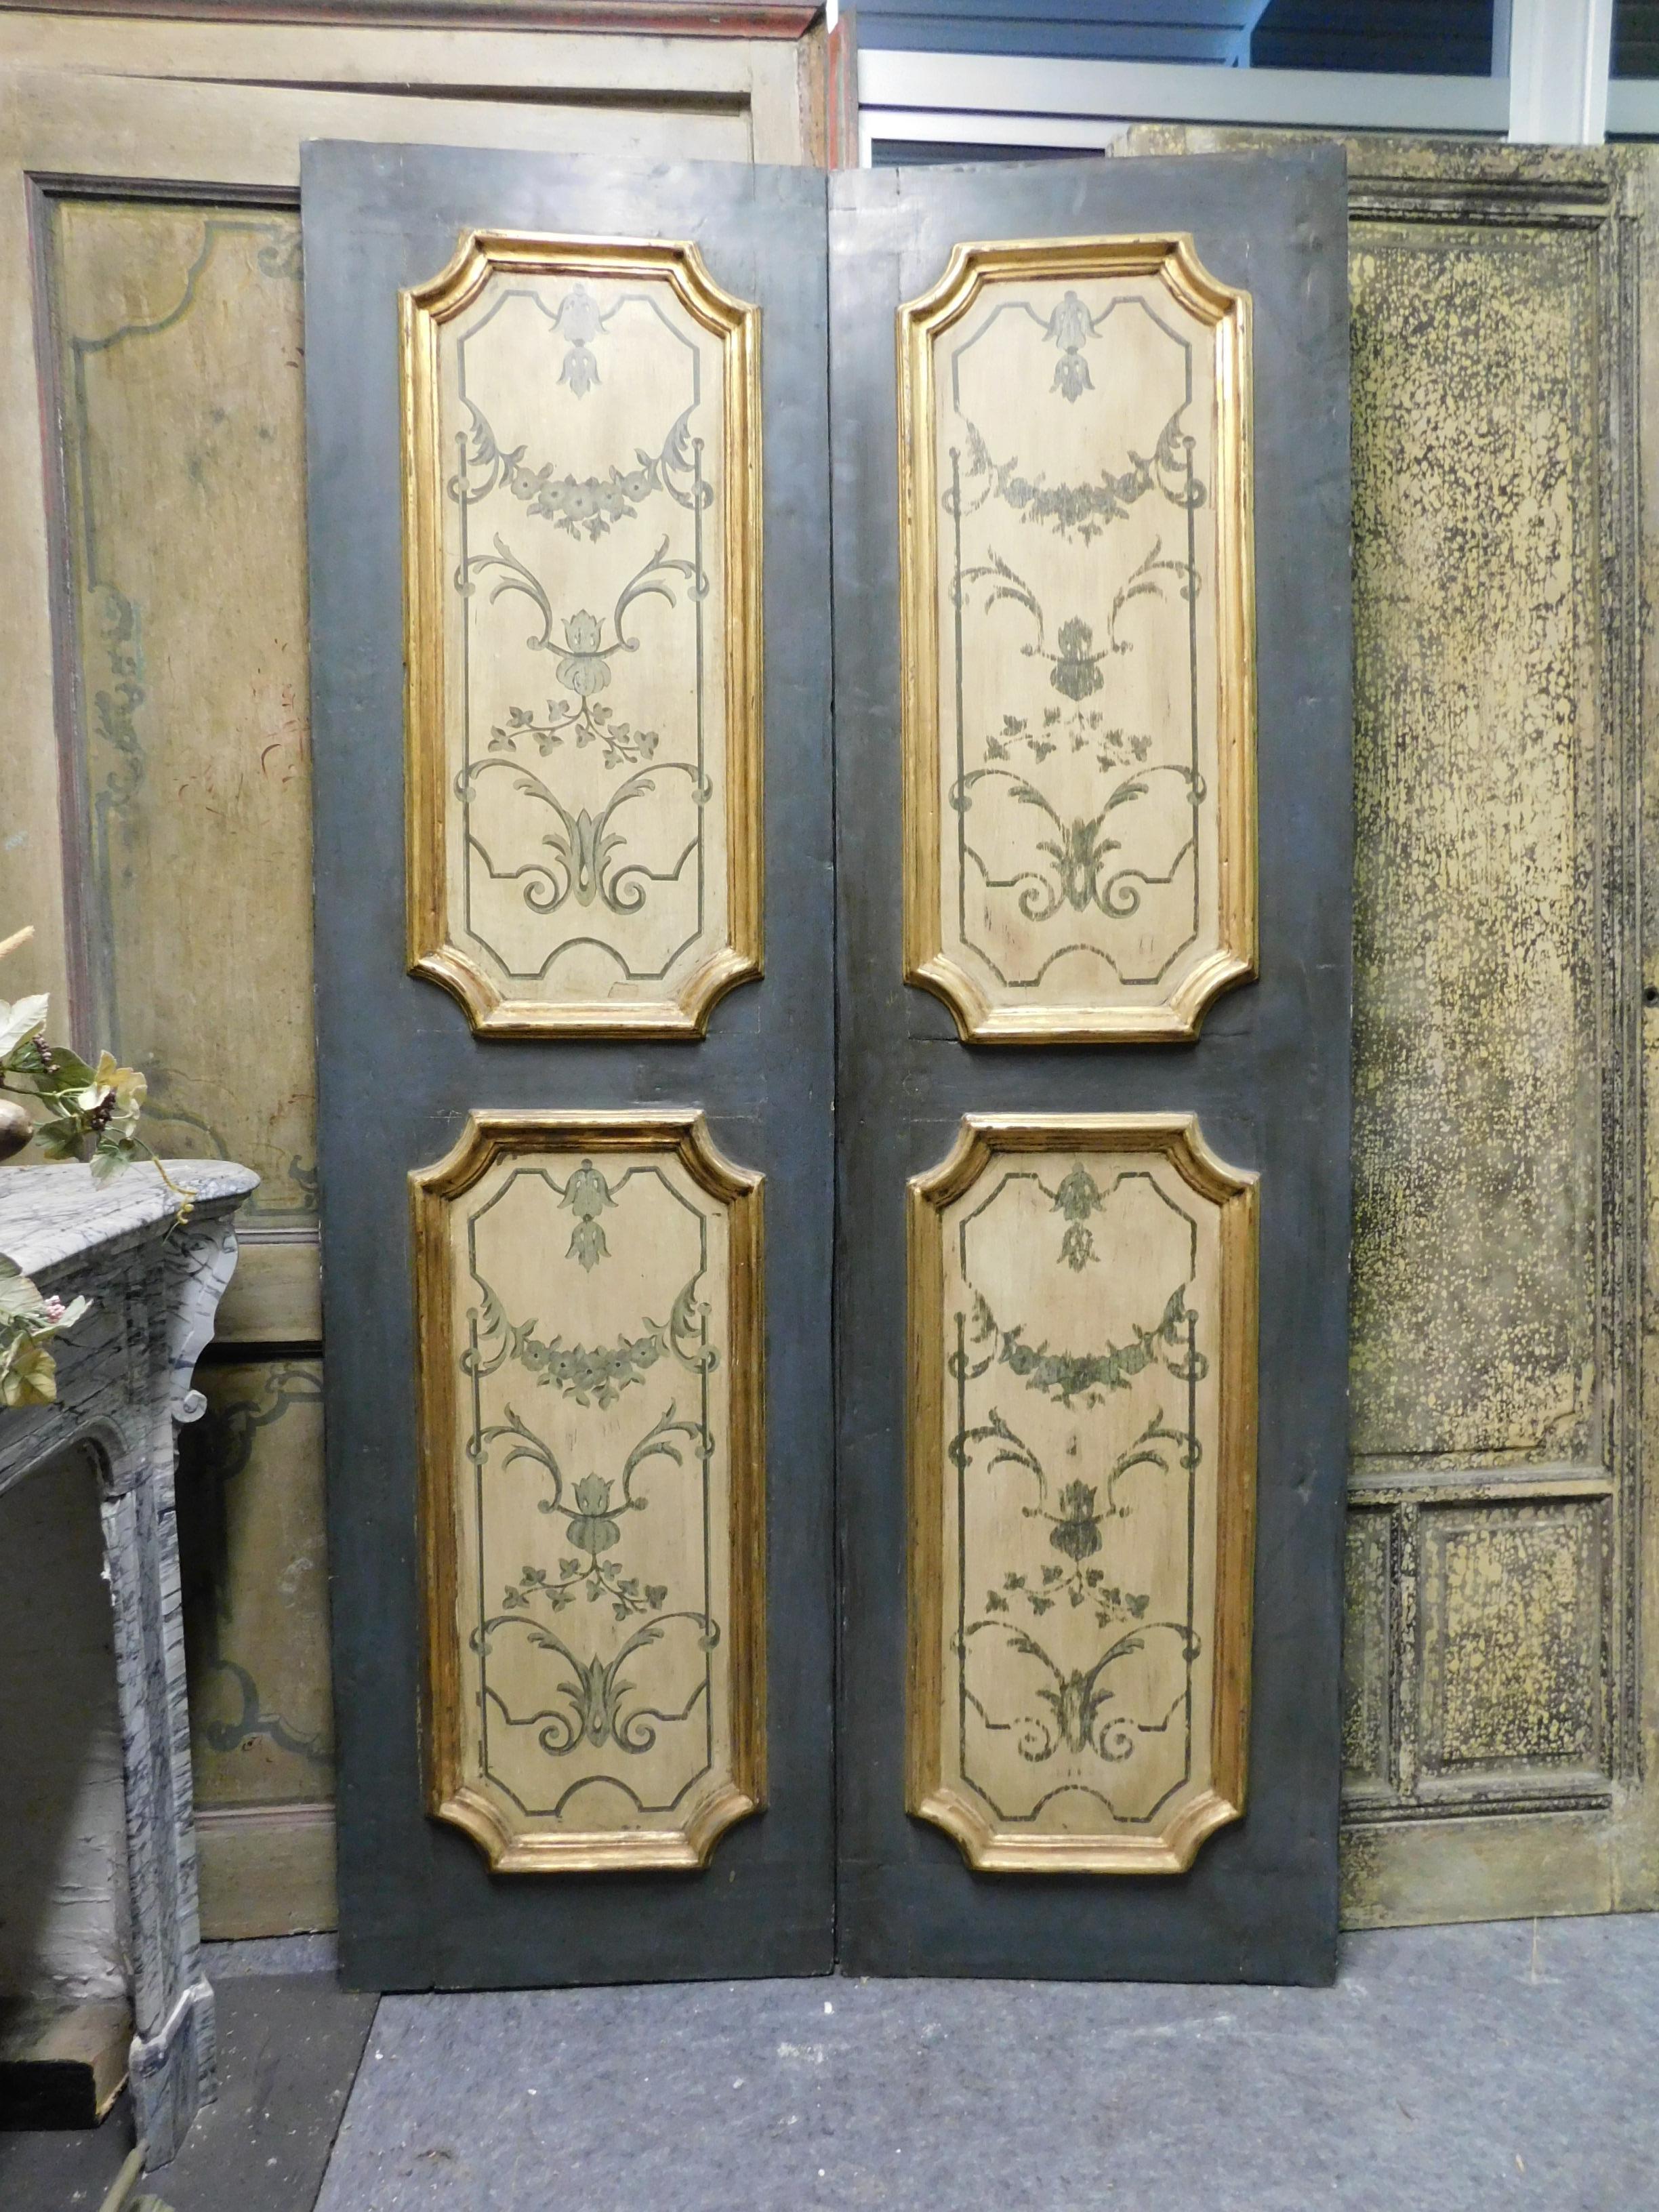 Ancient interior door, double-wing, hand-painted with decoration in the painted panels, with deep and golden molure, typical and original solid wood of the full eighteenth century, built entirely by craftsman for a palace in Italy, exact provenance